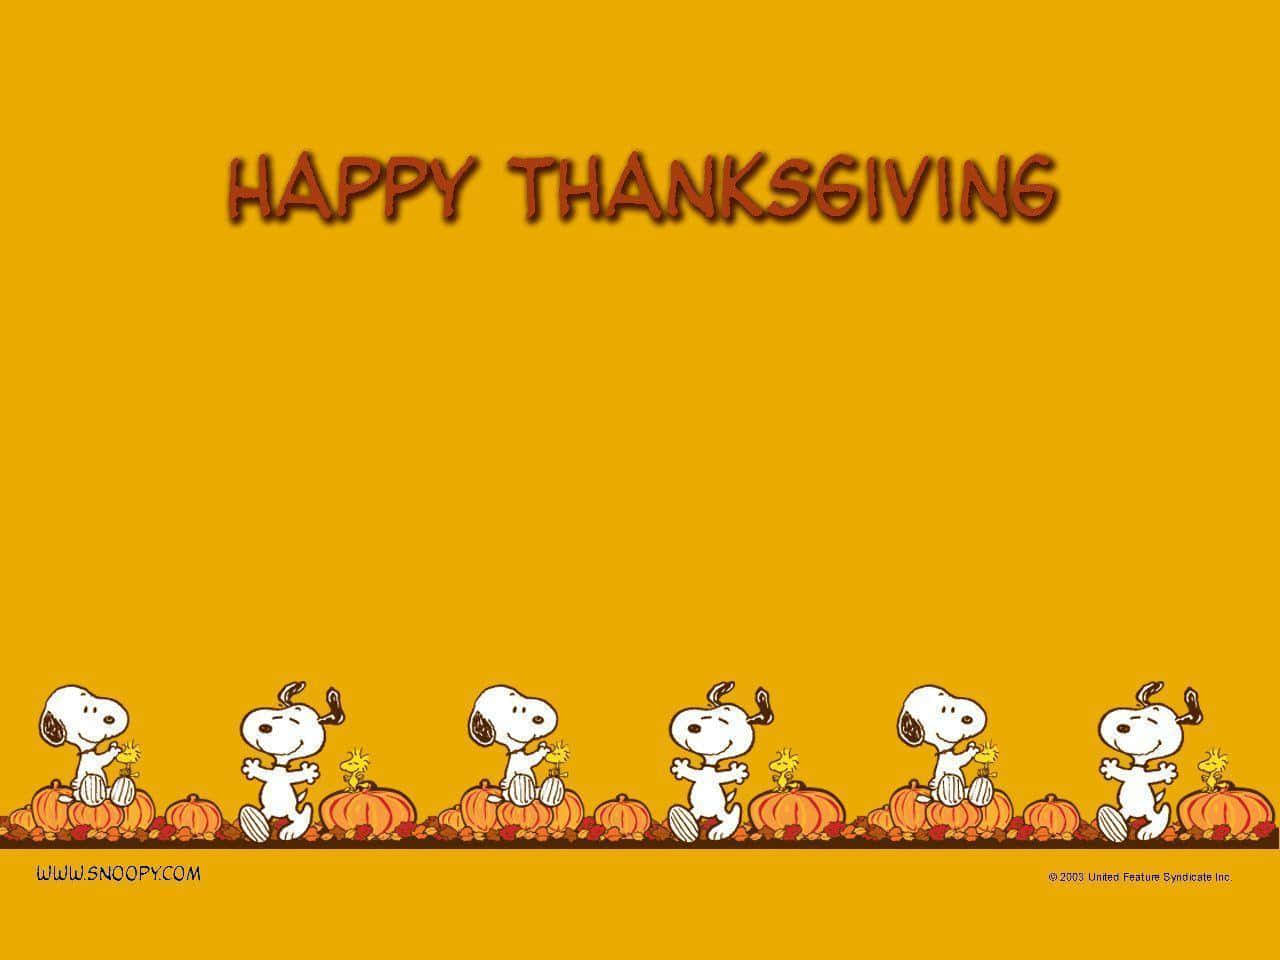 Celebrate Thanksgiving With Snoopy!